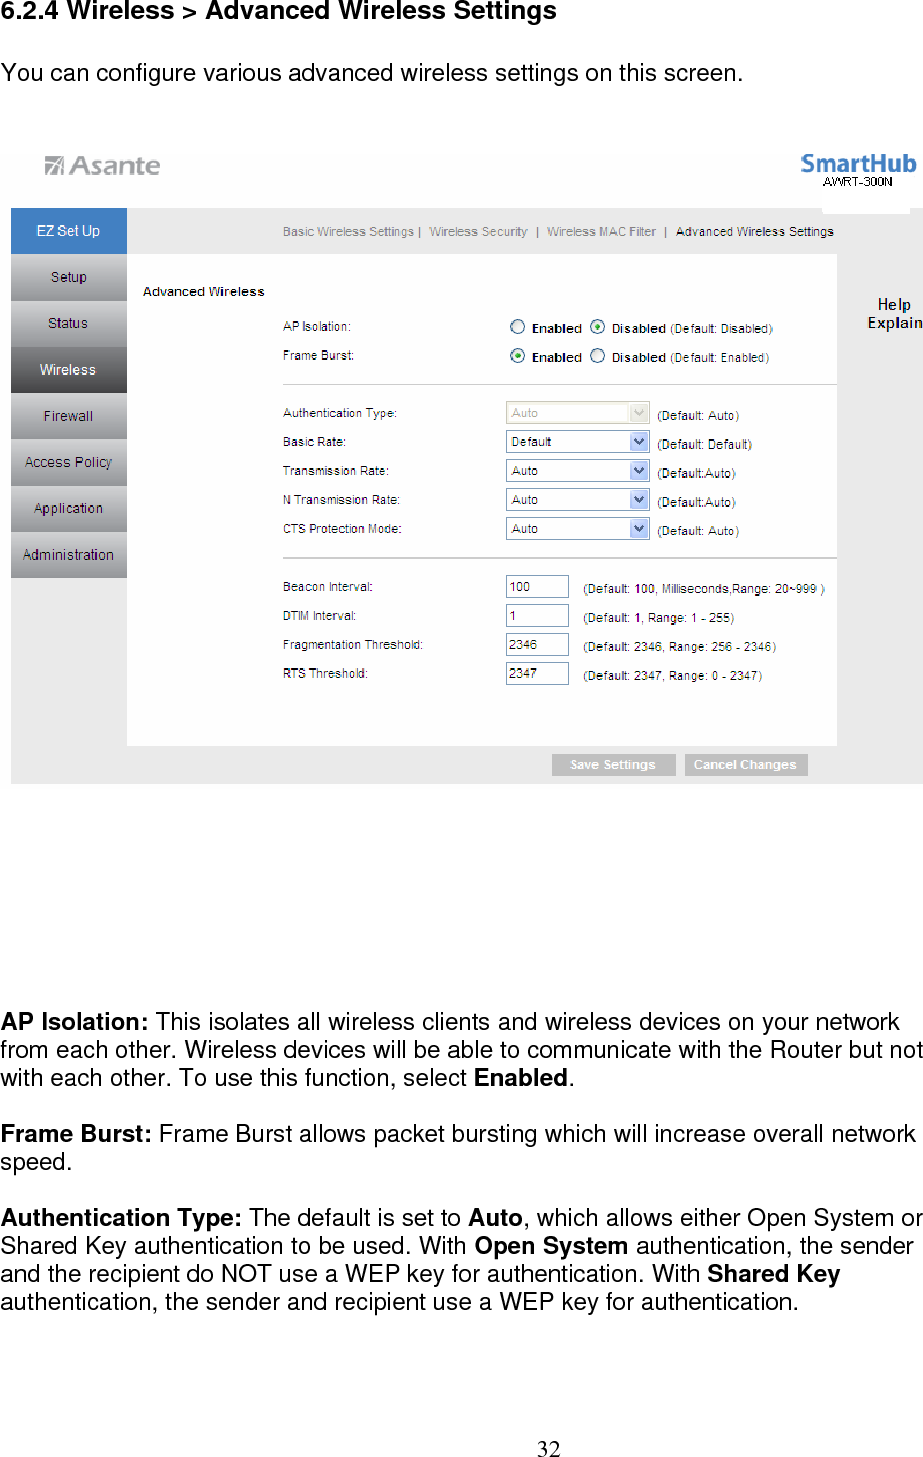  326.2.4 Wireless &gt; Advanced Wireless Settings You can configure various advanced wireless settings on this screen. AP Isolation: This isolates all wireless clients and wireless devices on your network  from each other. Wireless devices will be able to communicate with the Router but not with each other. To use this function, select Enabled.  Frame Burst: Frame Burst allows packet bursting which will increase overall network  speed.  Authentication Type: The default is set to Auto, which allows either Open System or Shared Key authentication to be used. With Open System authentication, the sender  and the recipient do NOT use a WEP key for authentication. With Shared Key  authentication, the sender and recipient use a WEP key for authentication.  